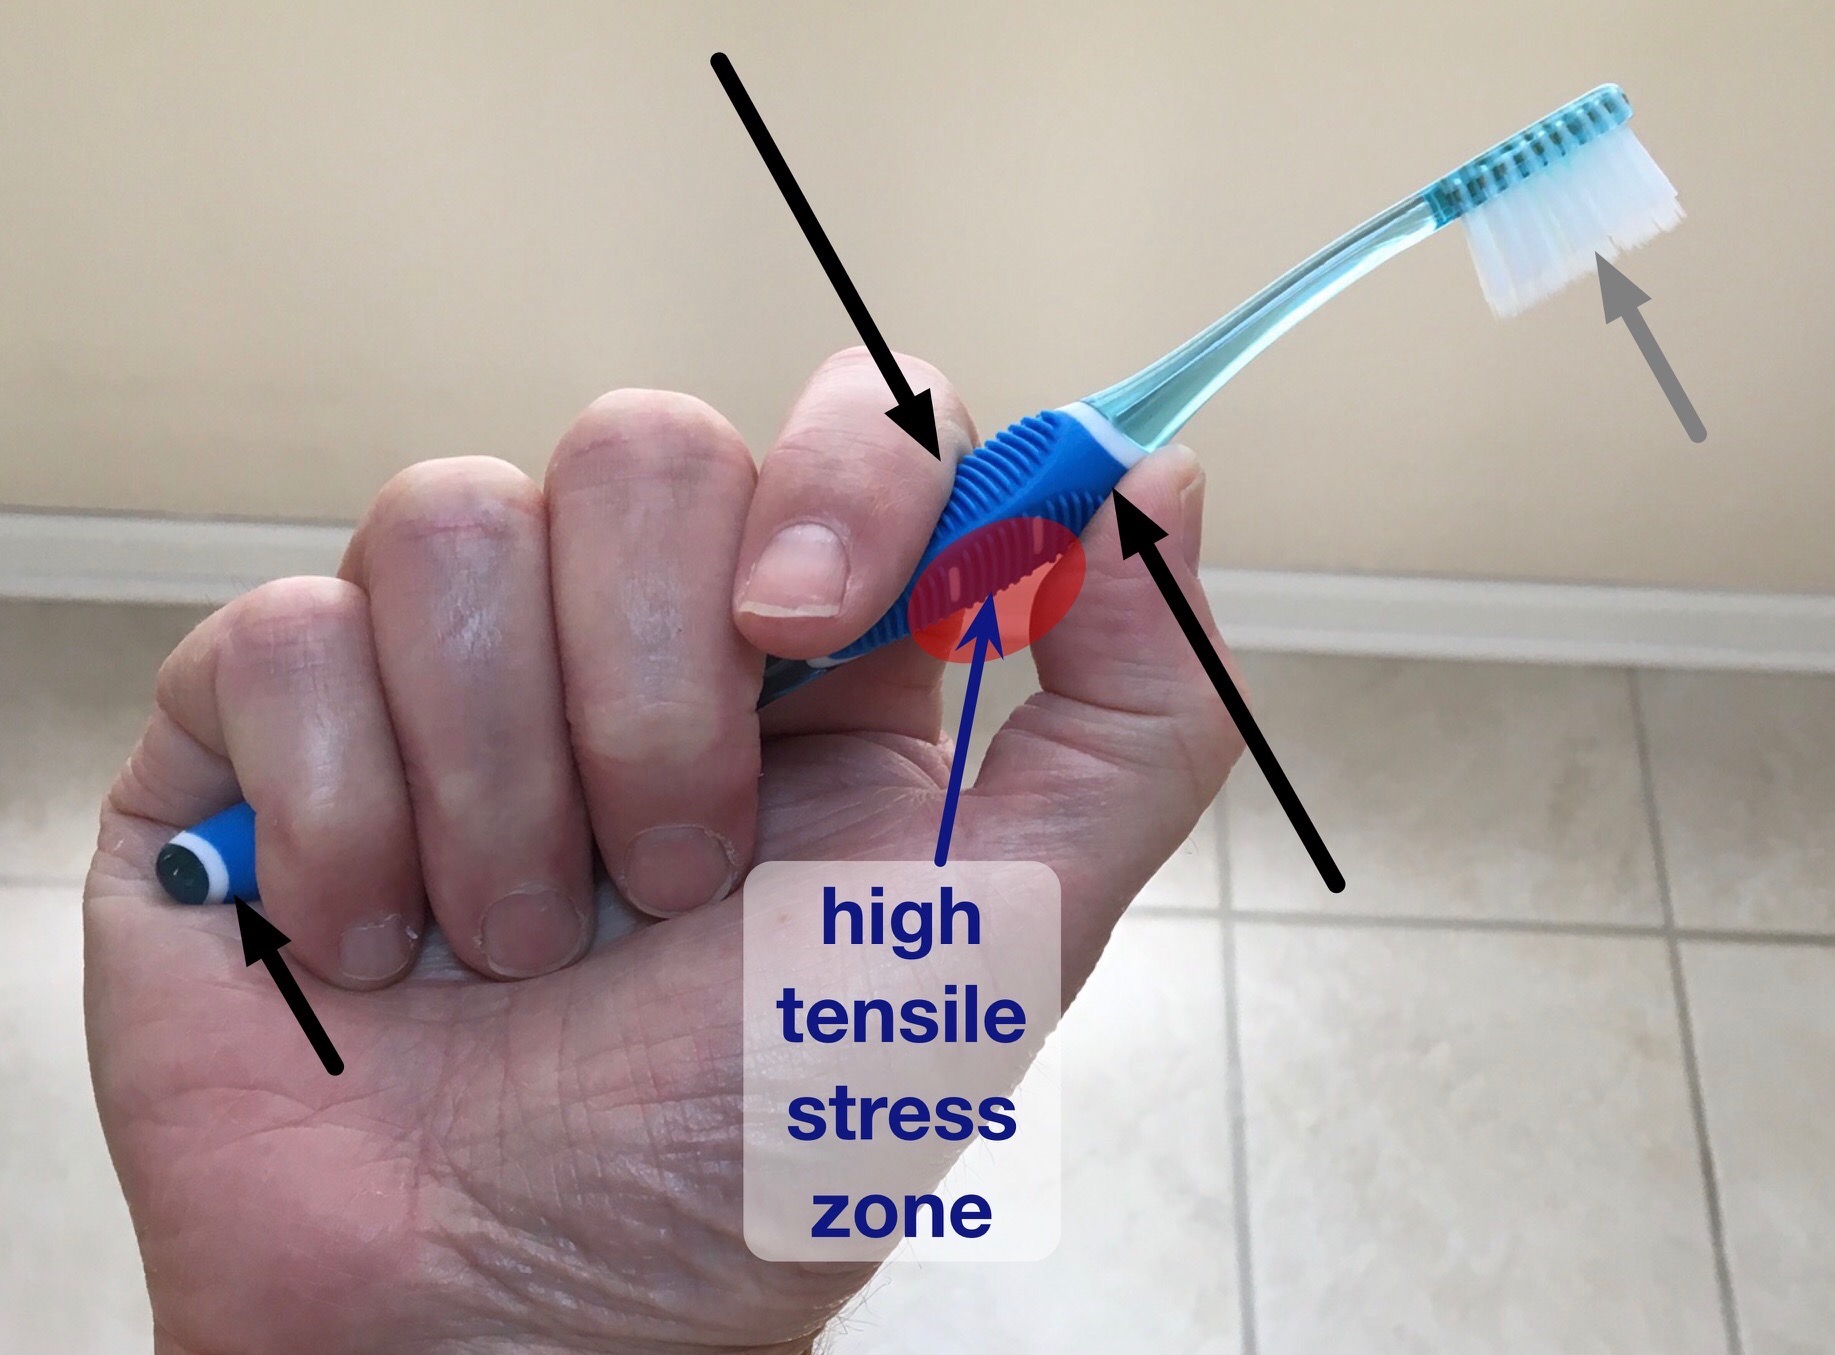 Toothbrush with hand forces